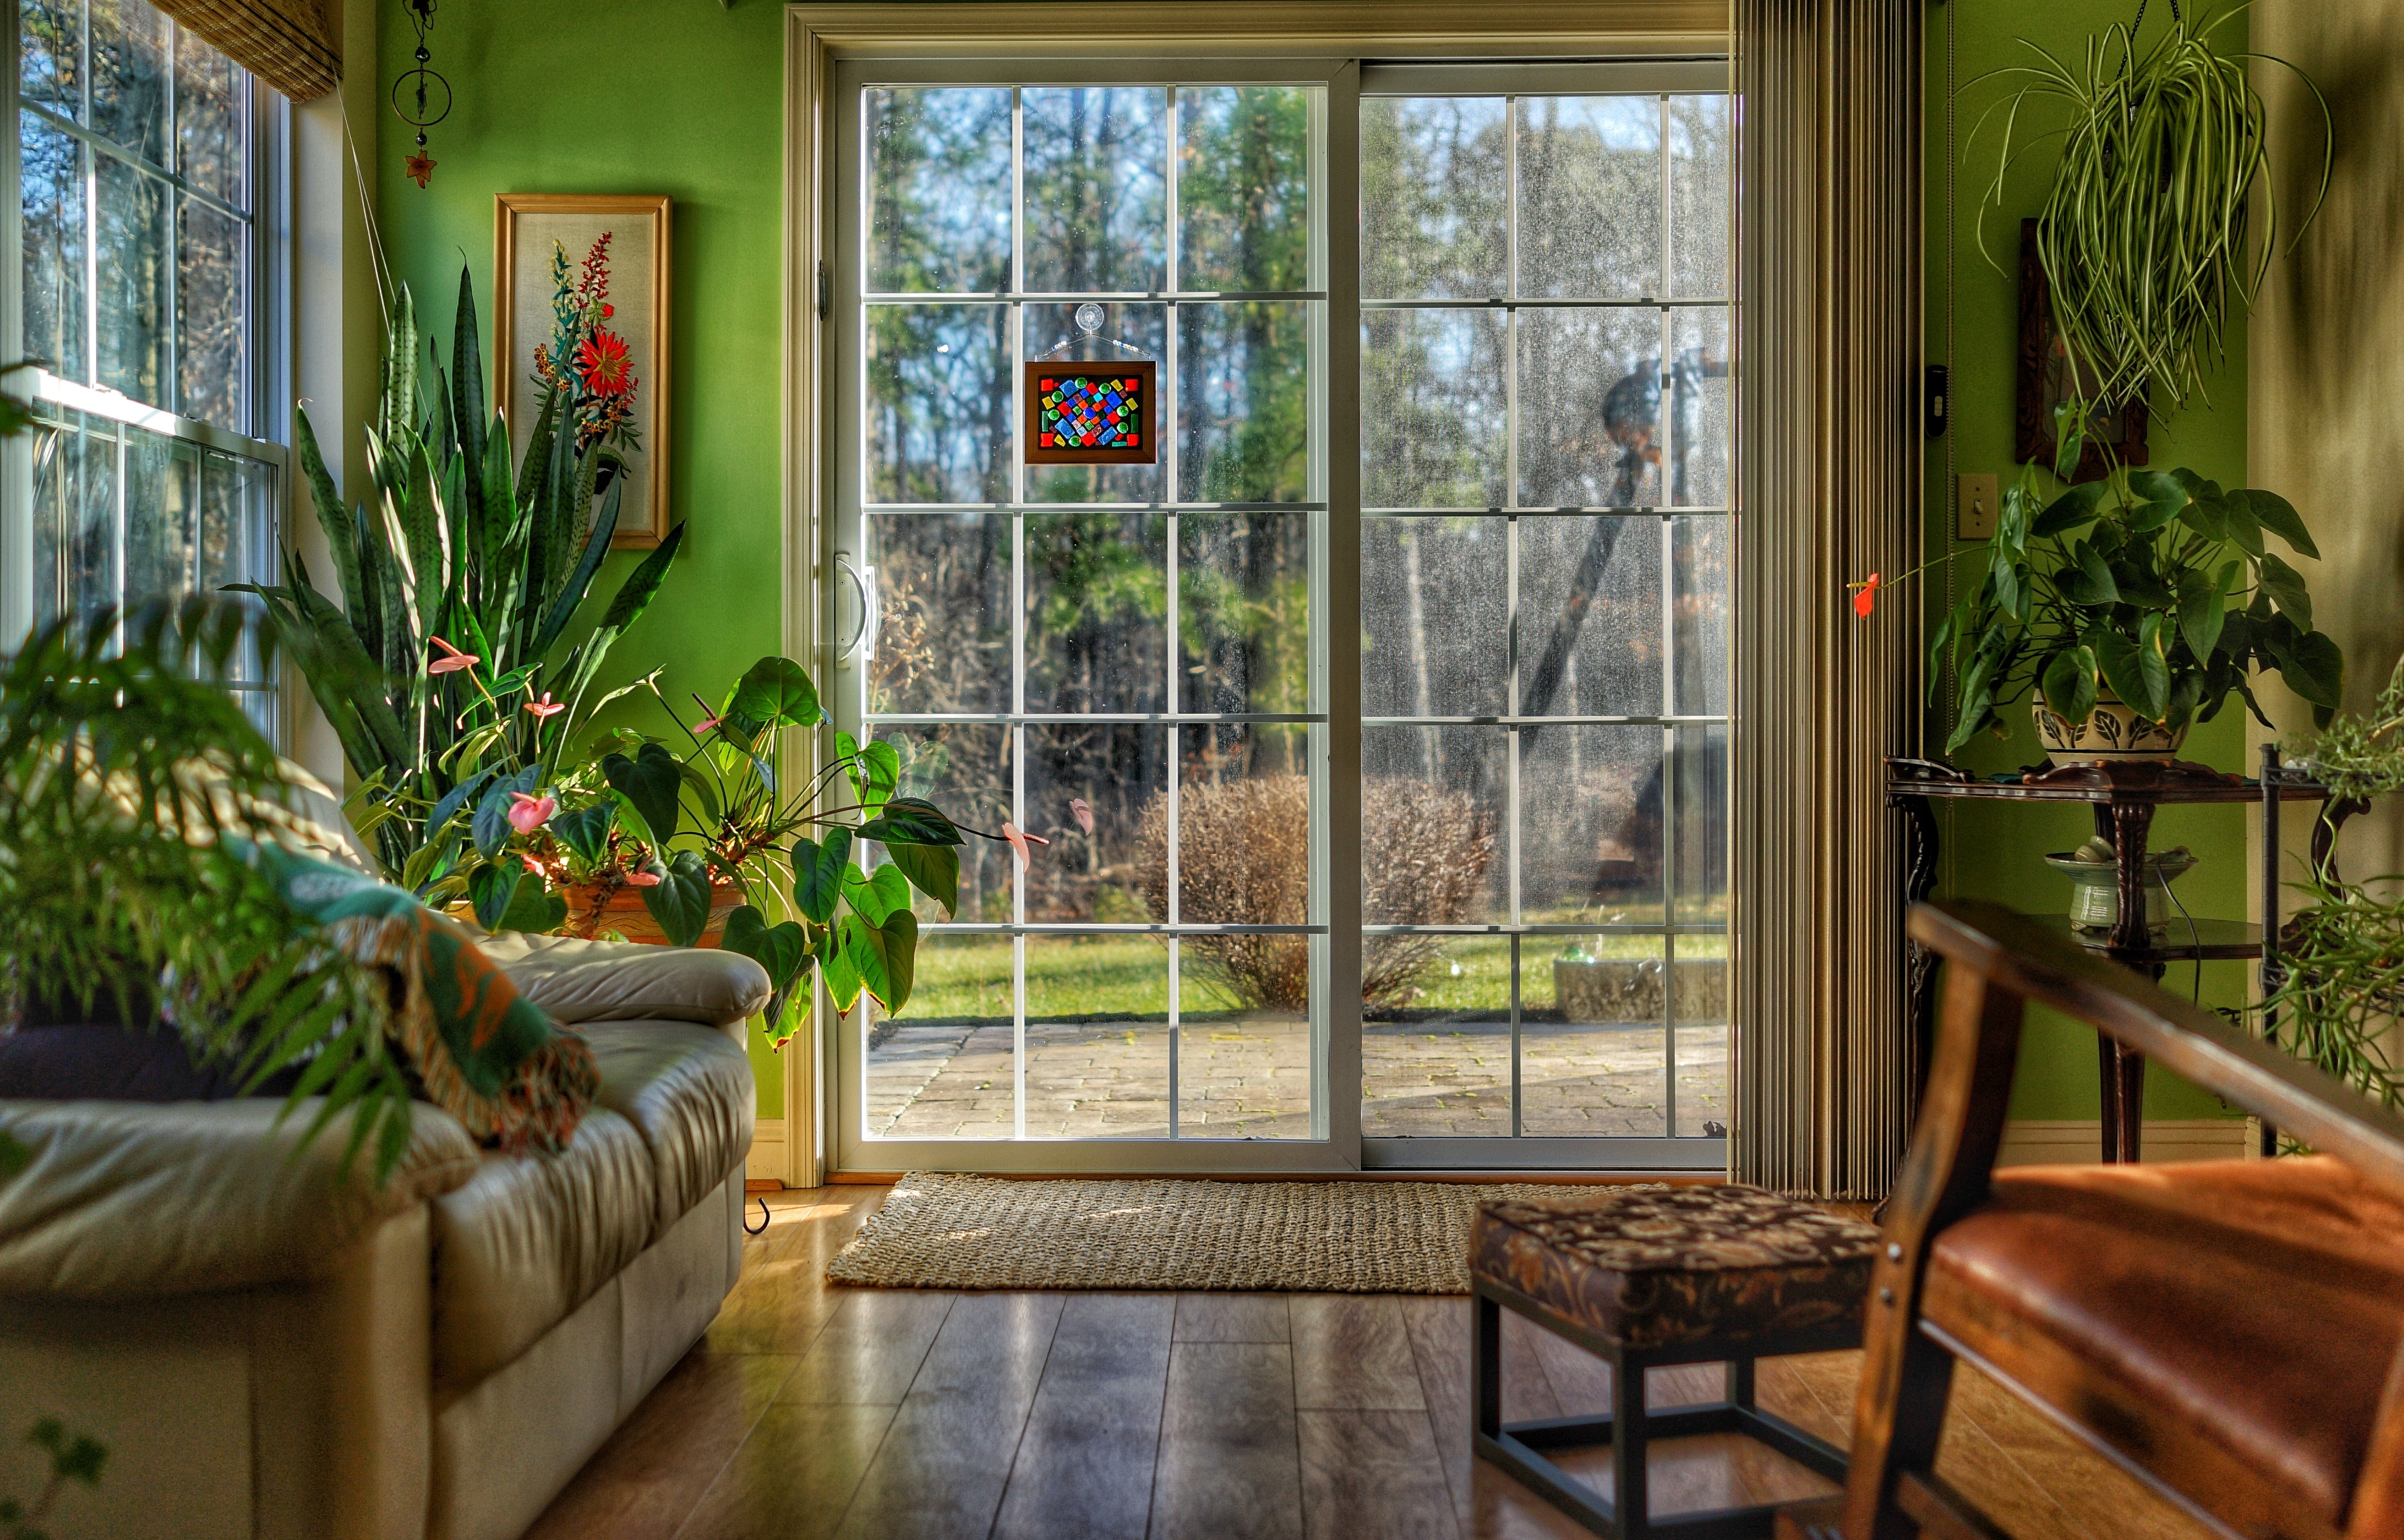 7 Tips for Creating a Spiritual Space at Home